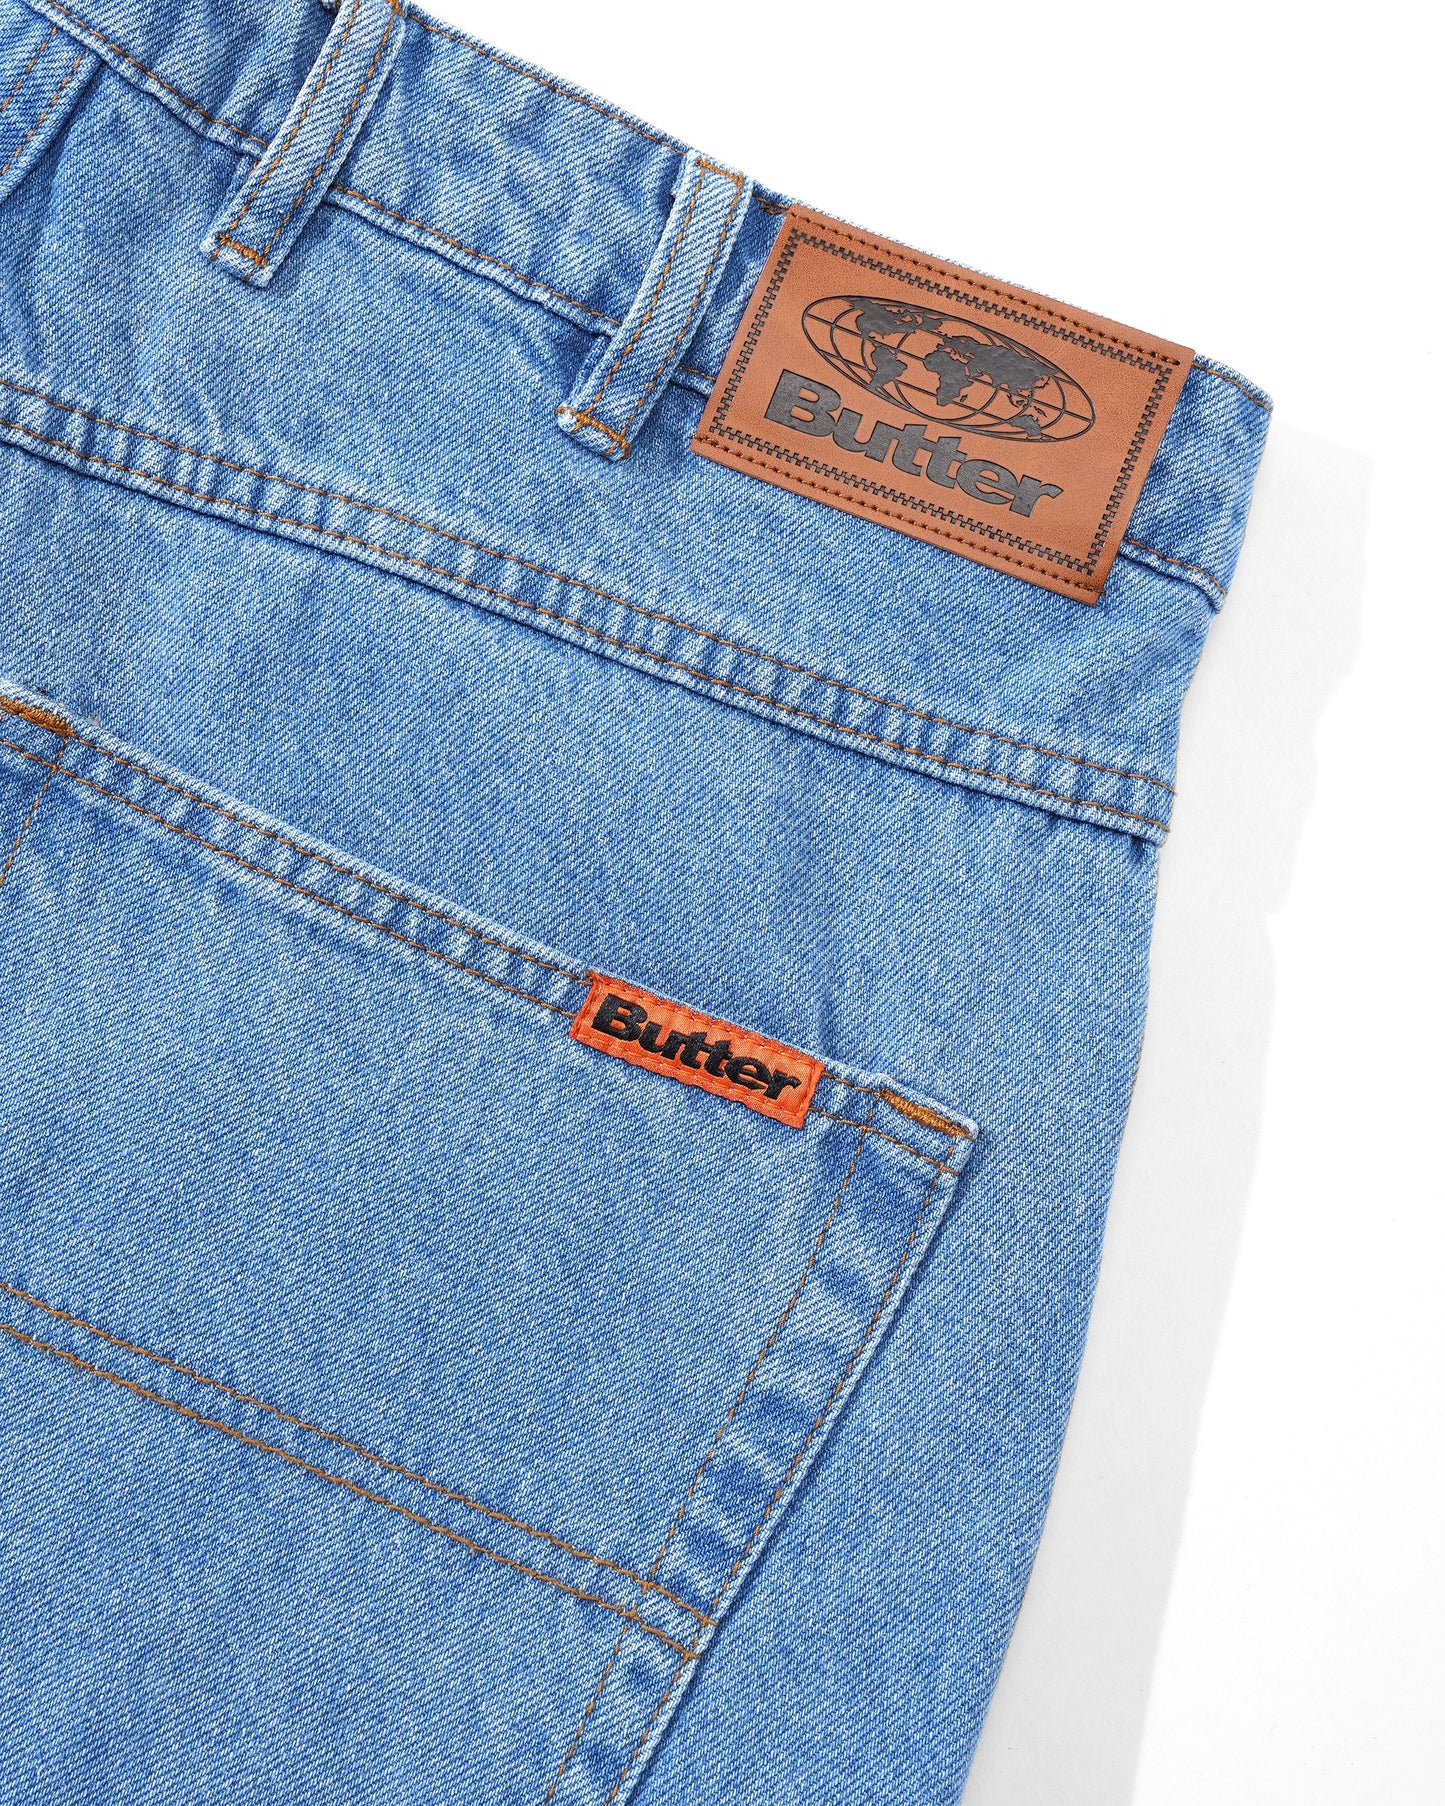 Butter Goods Relaxed Denim Jeans - Washed Indigo